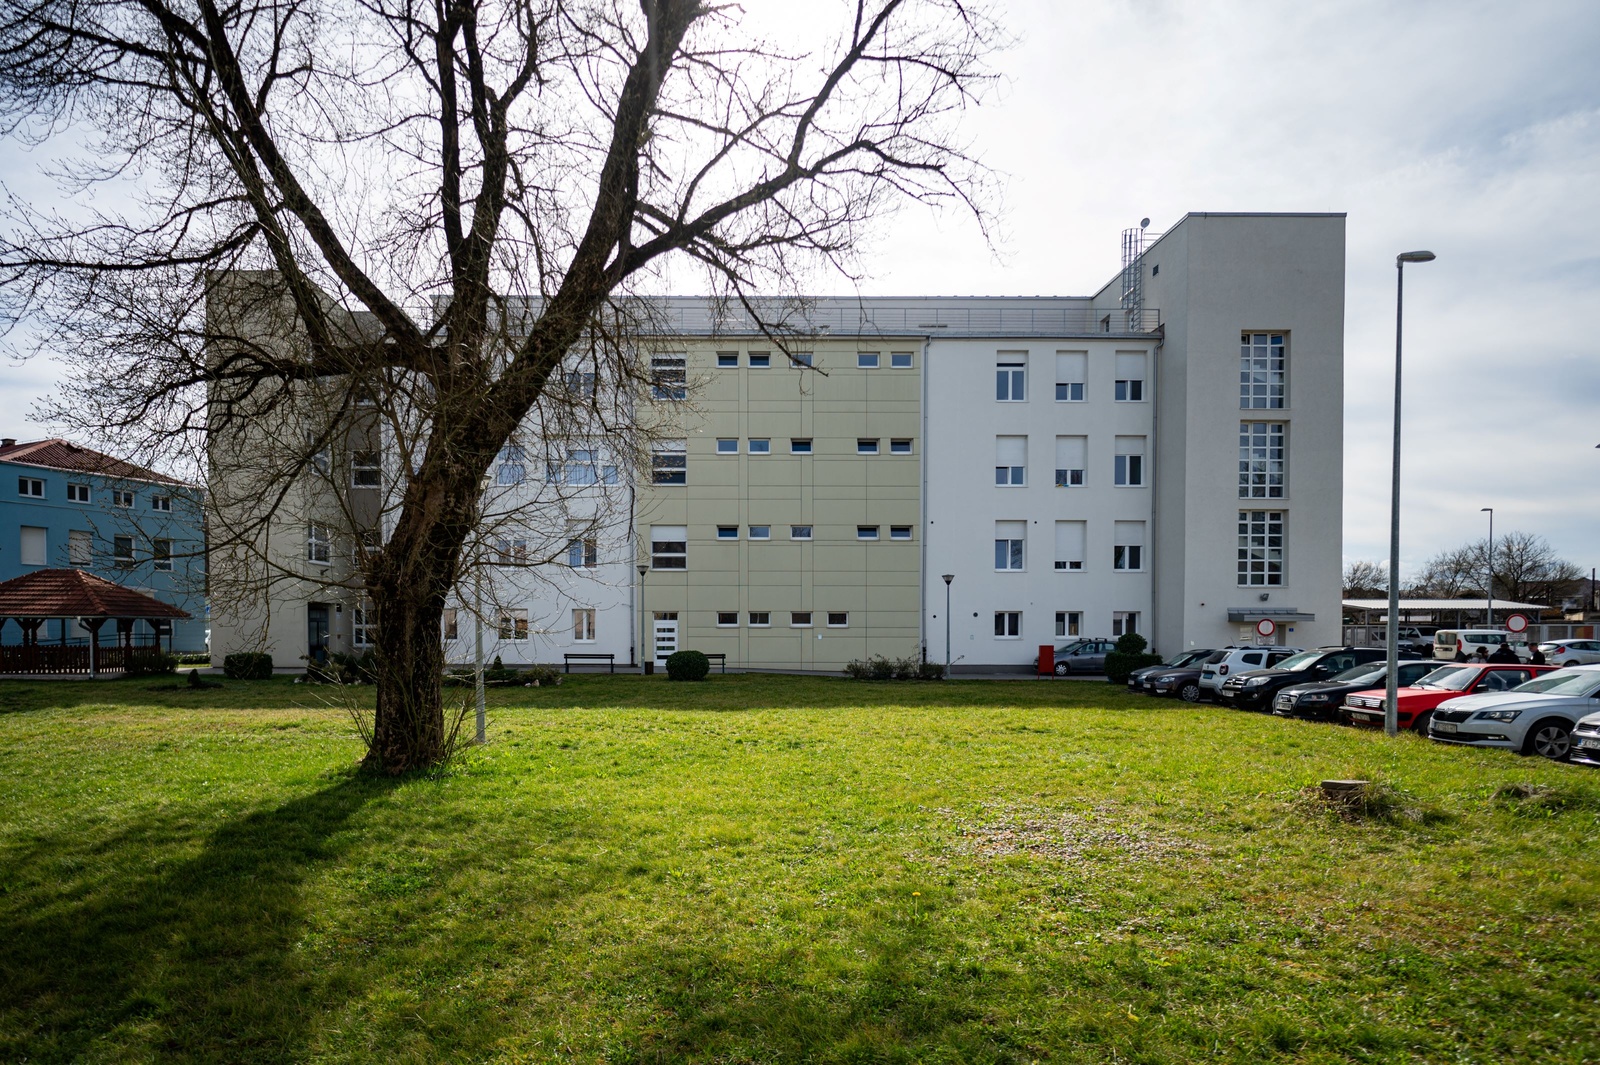 The Home for Older People in Glina, Croatia, reconstructed through the Regional Housing Programme, a joint initiative to support refugees and displaced people from the conflicts in the former Yugoslavia.